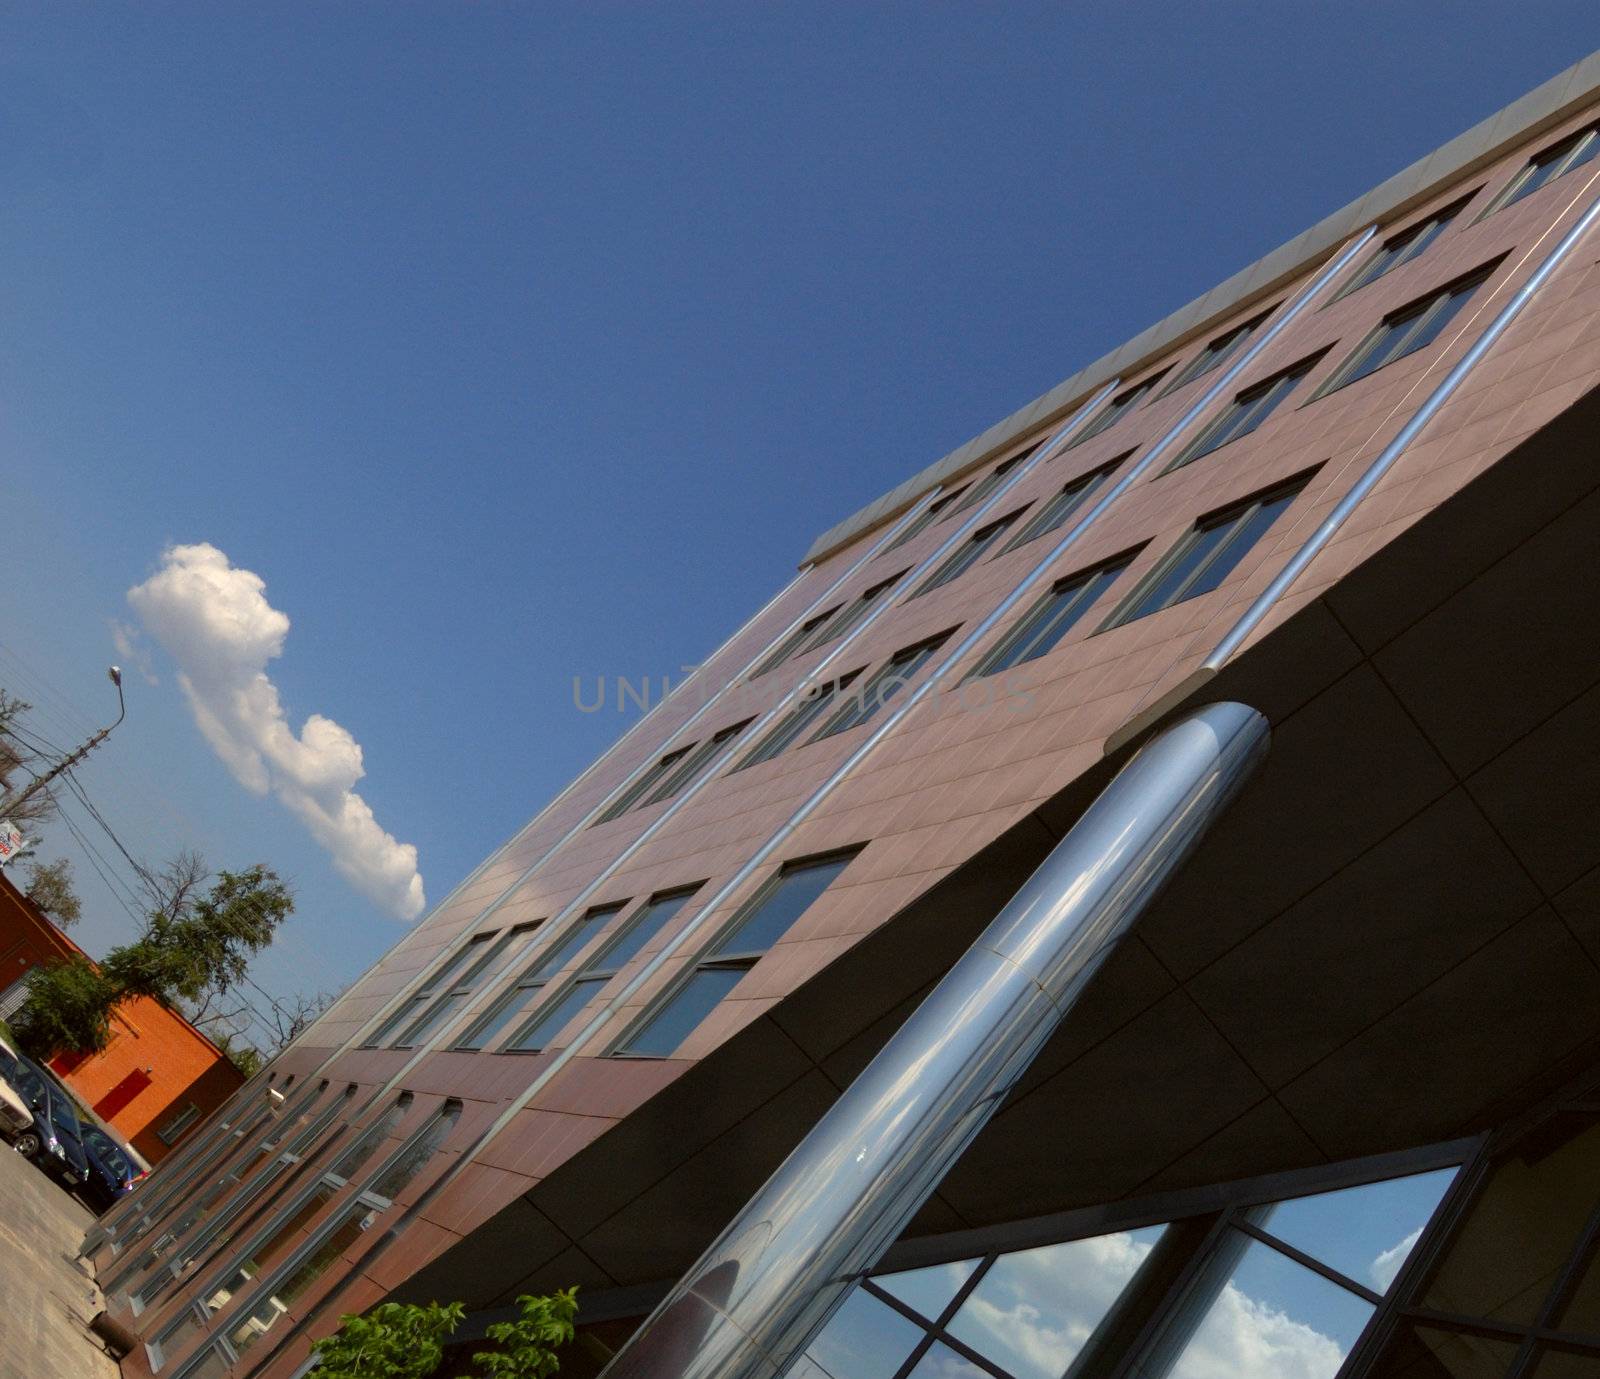 view of new modern office building and sky with clouds